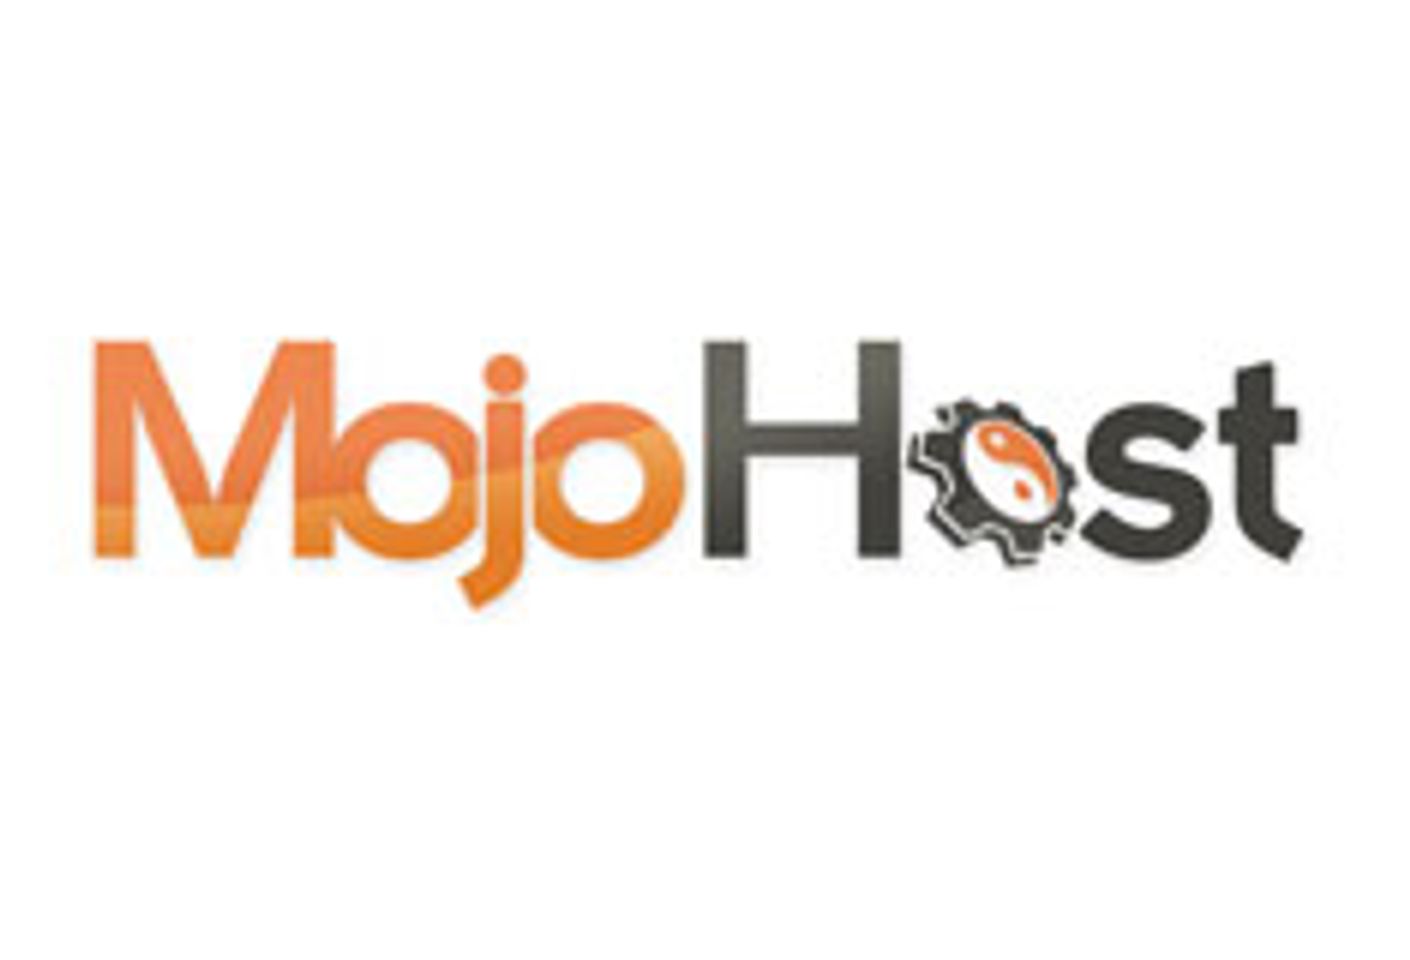 MojoHost Internext Badge Giveaway and Data Center Tour Sign-up